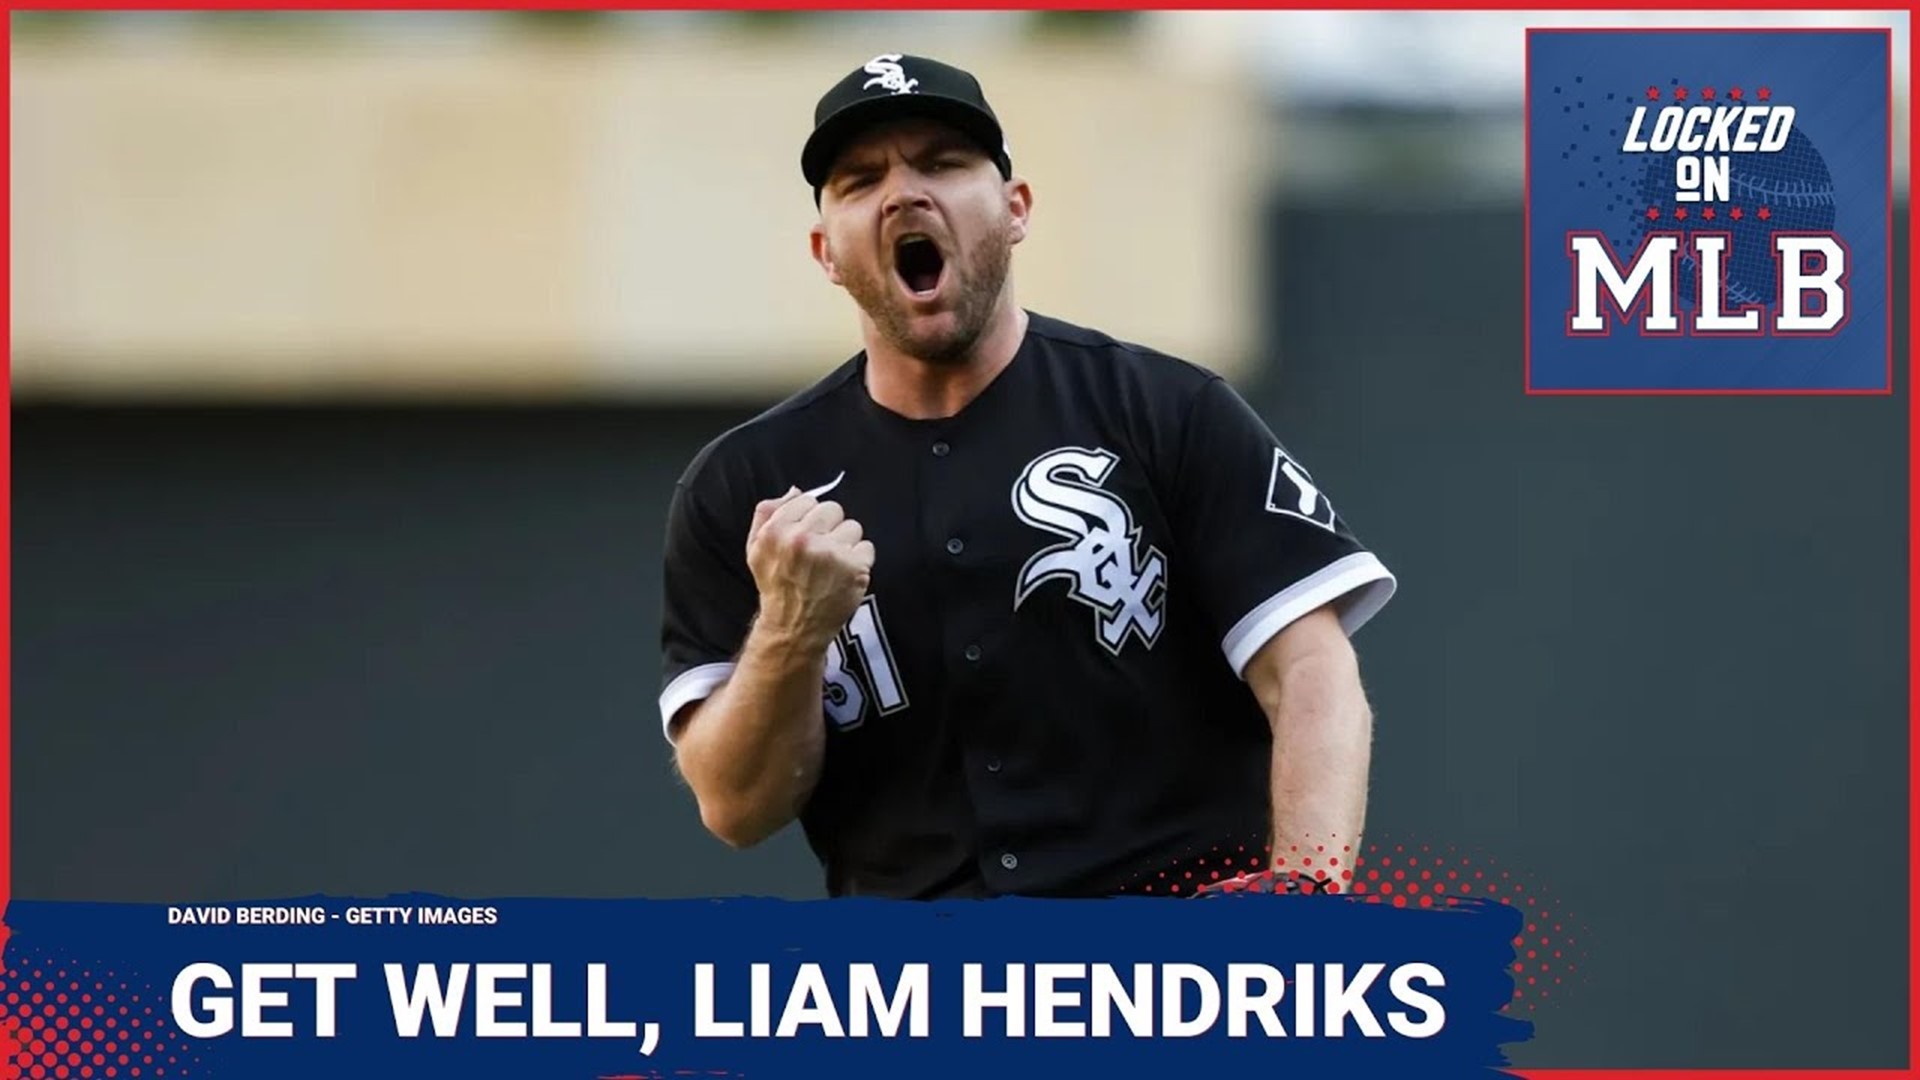 Locked on MLB - Answering Listener Questions and Wishing Liam Hendriks Well - January 9, 2023